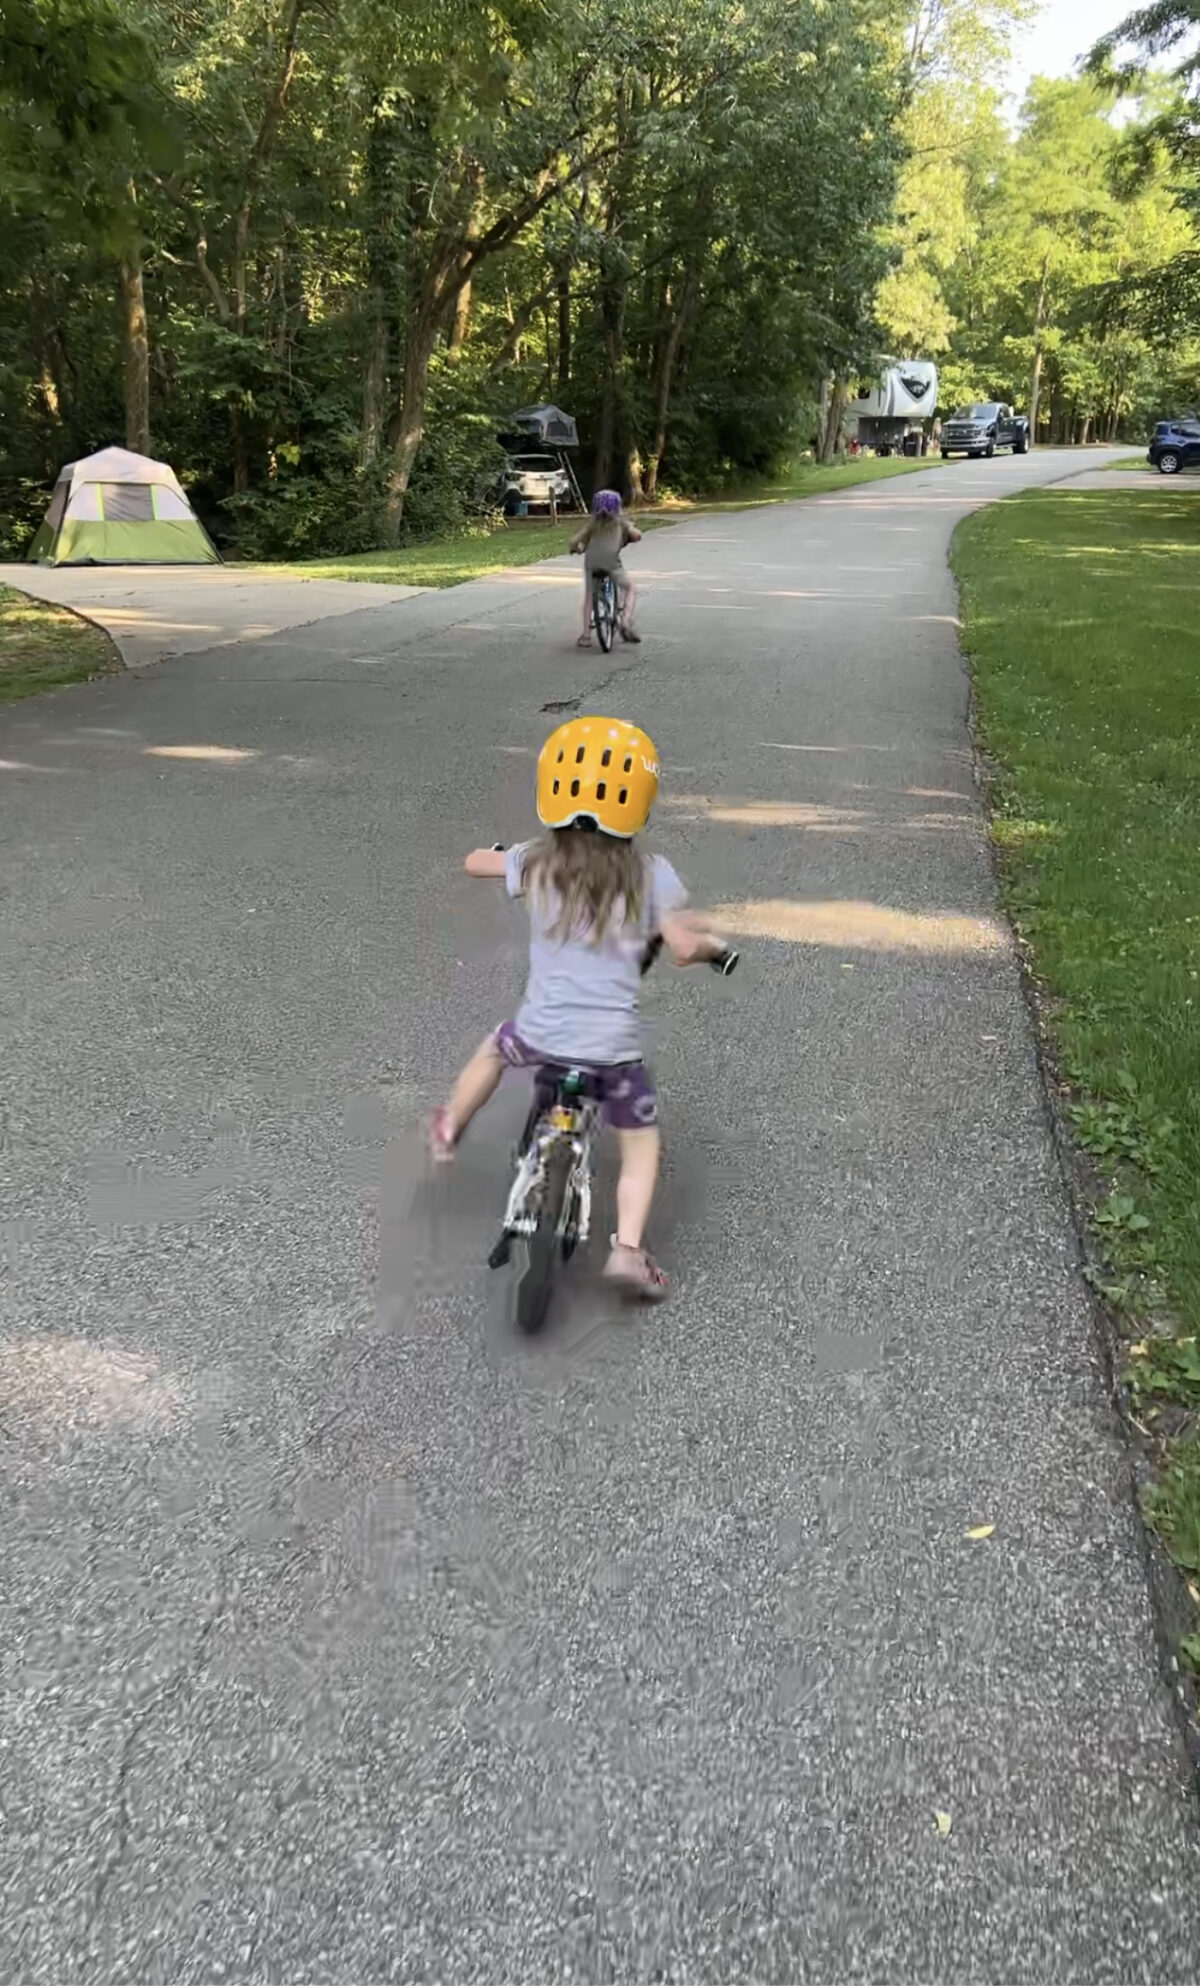 Bringing our kids' Woom Bikes along was worth it. After seeing their parents bike, they wanted their turn too! 